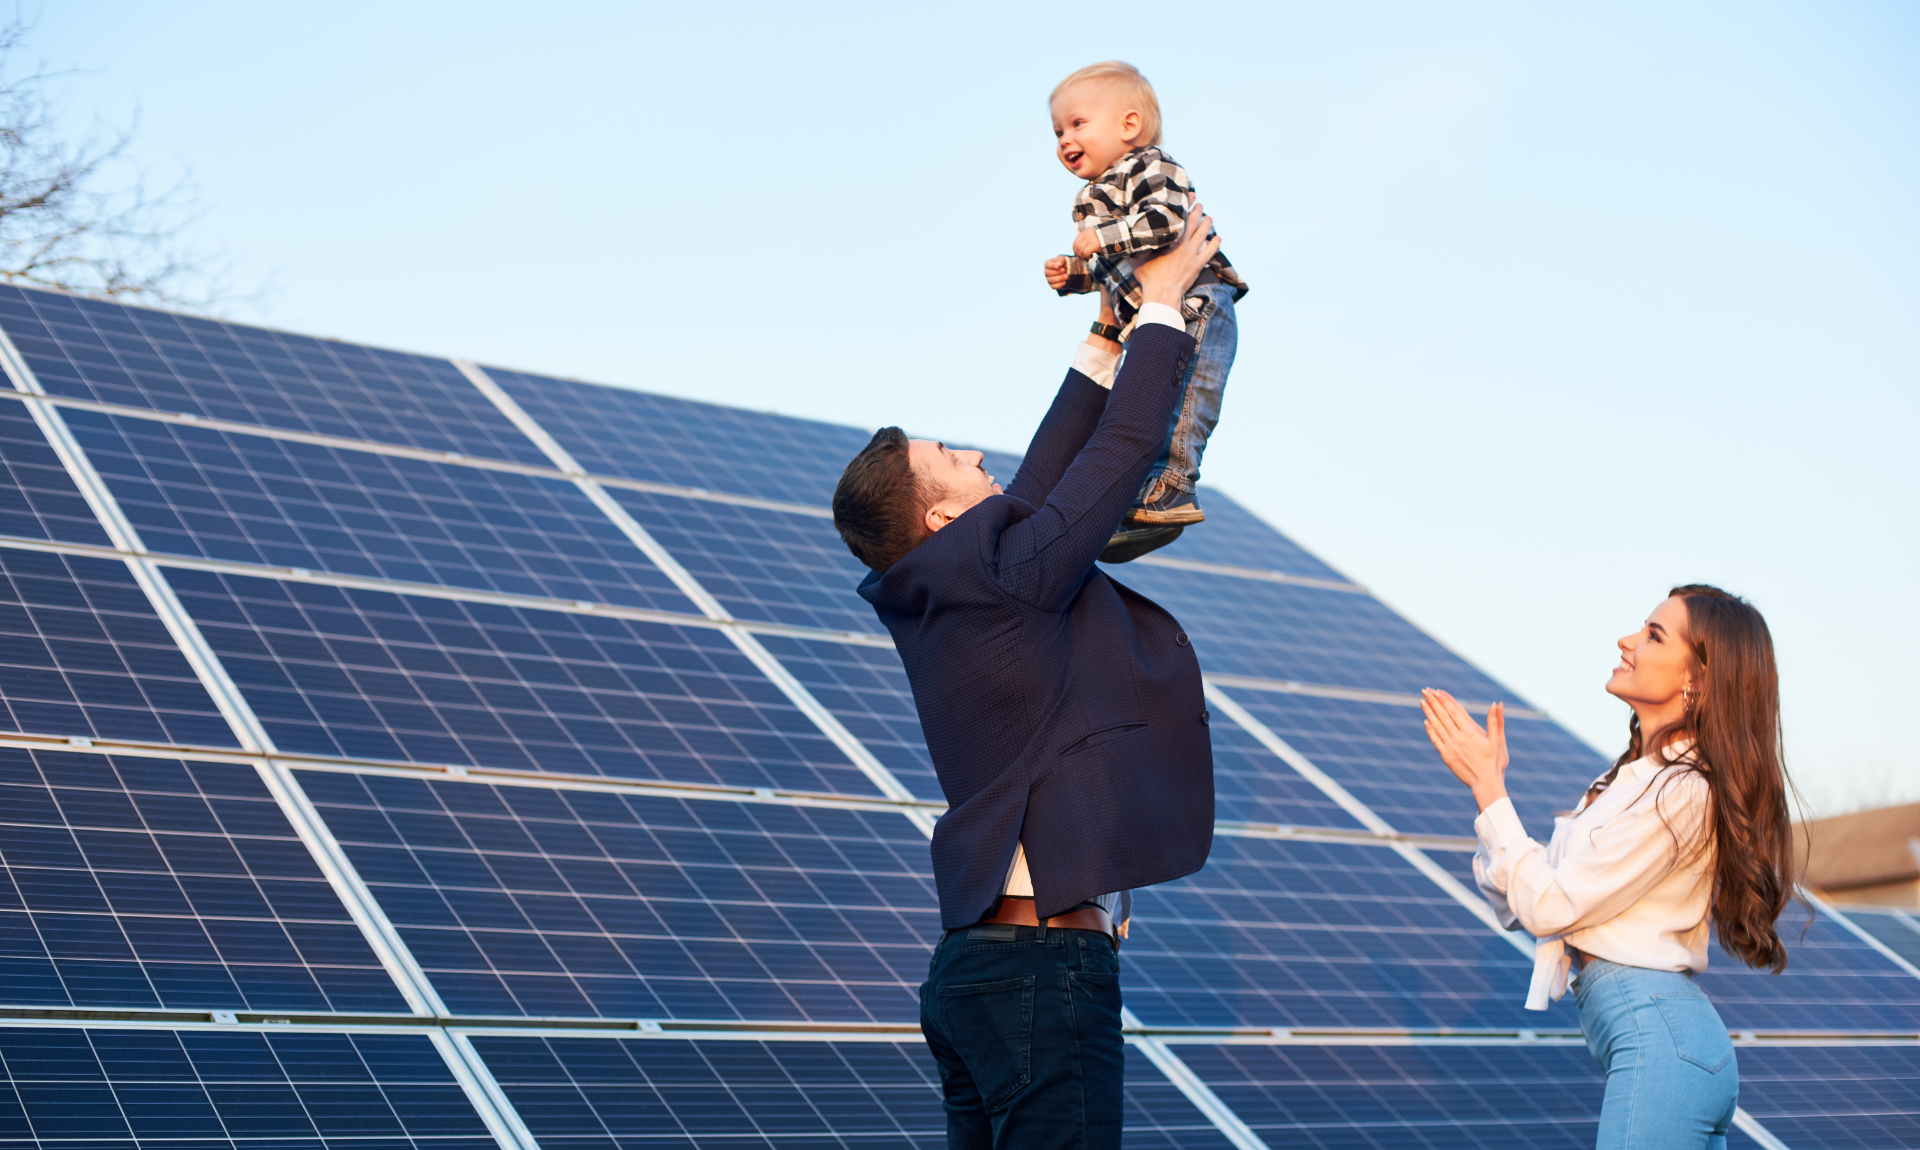 Happy family spending time in front of solar panels.